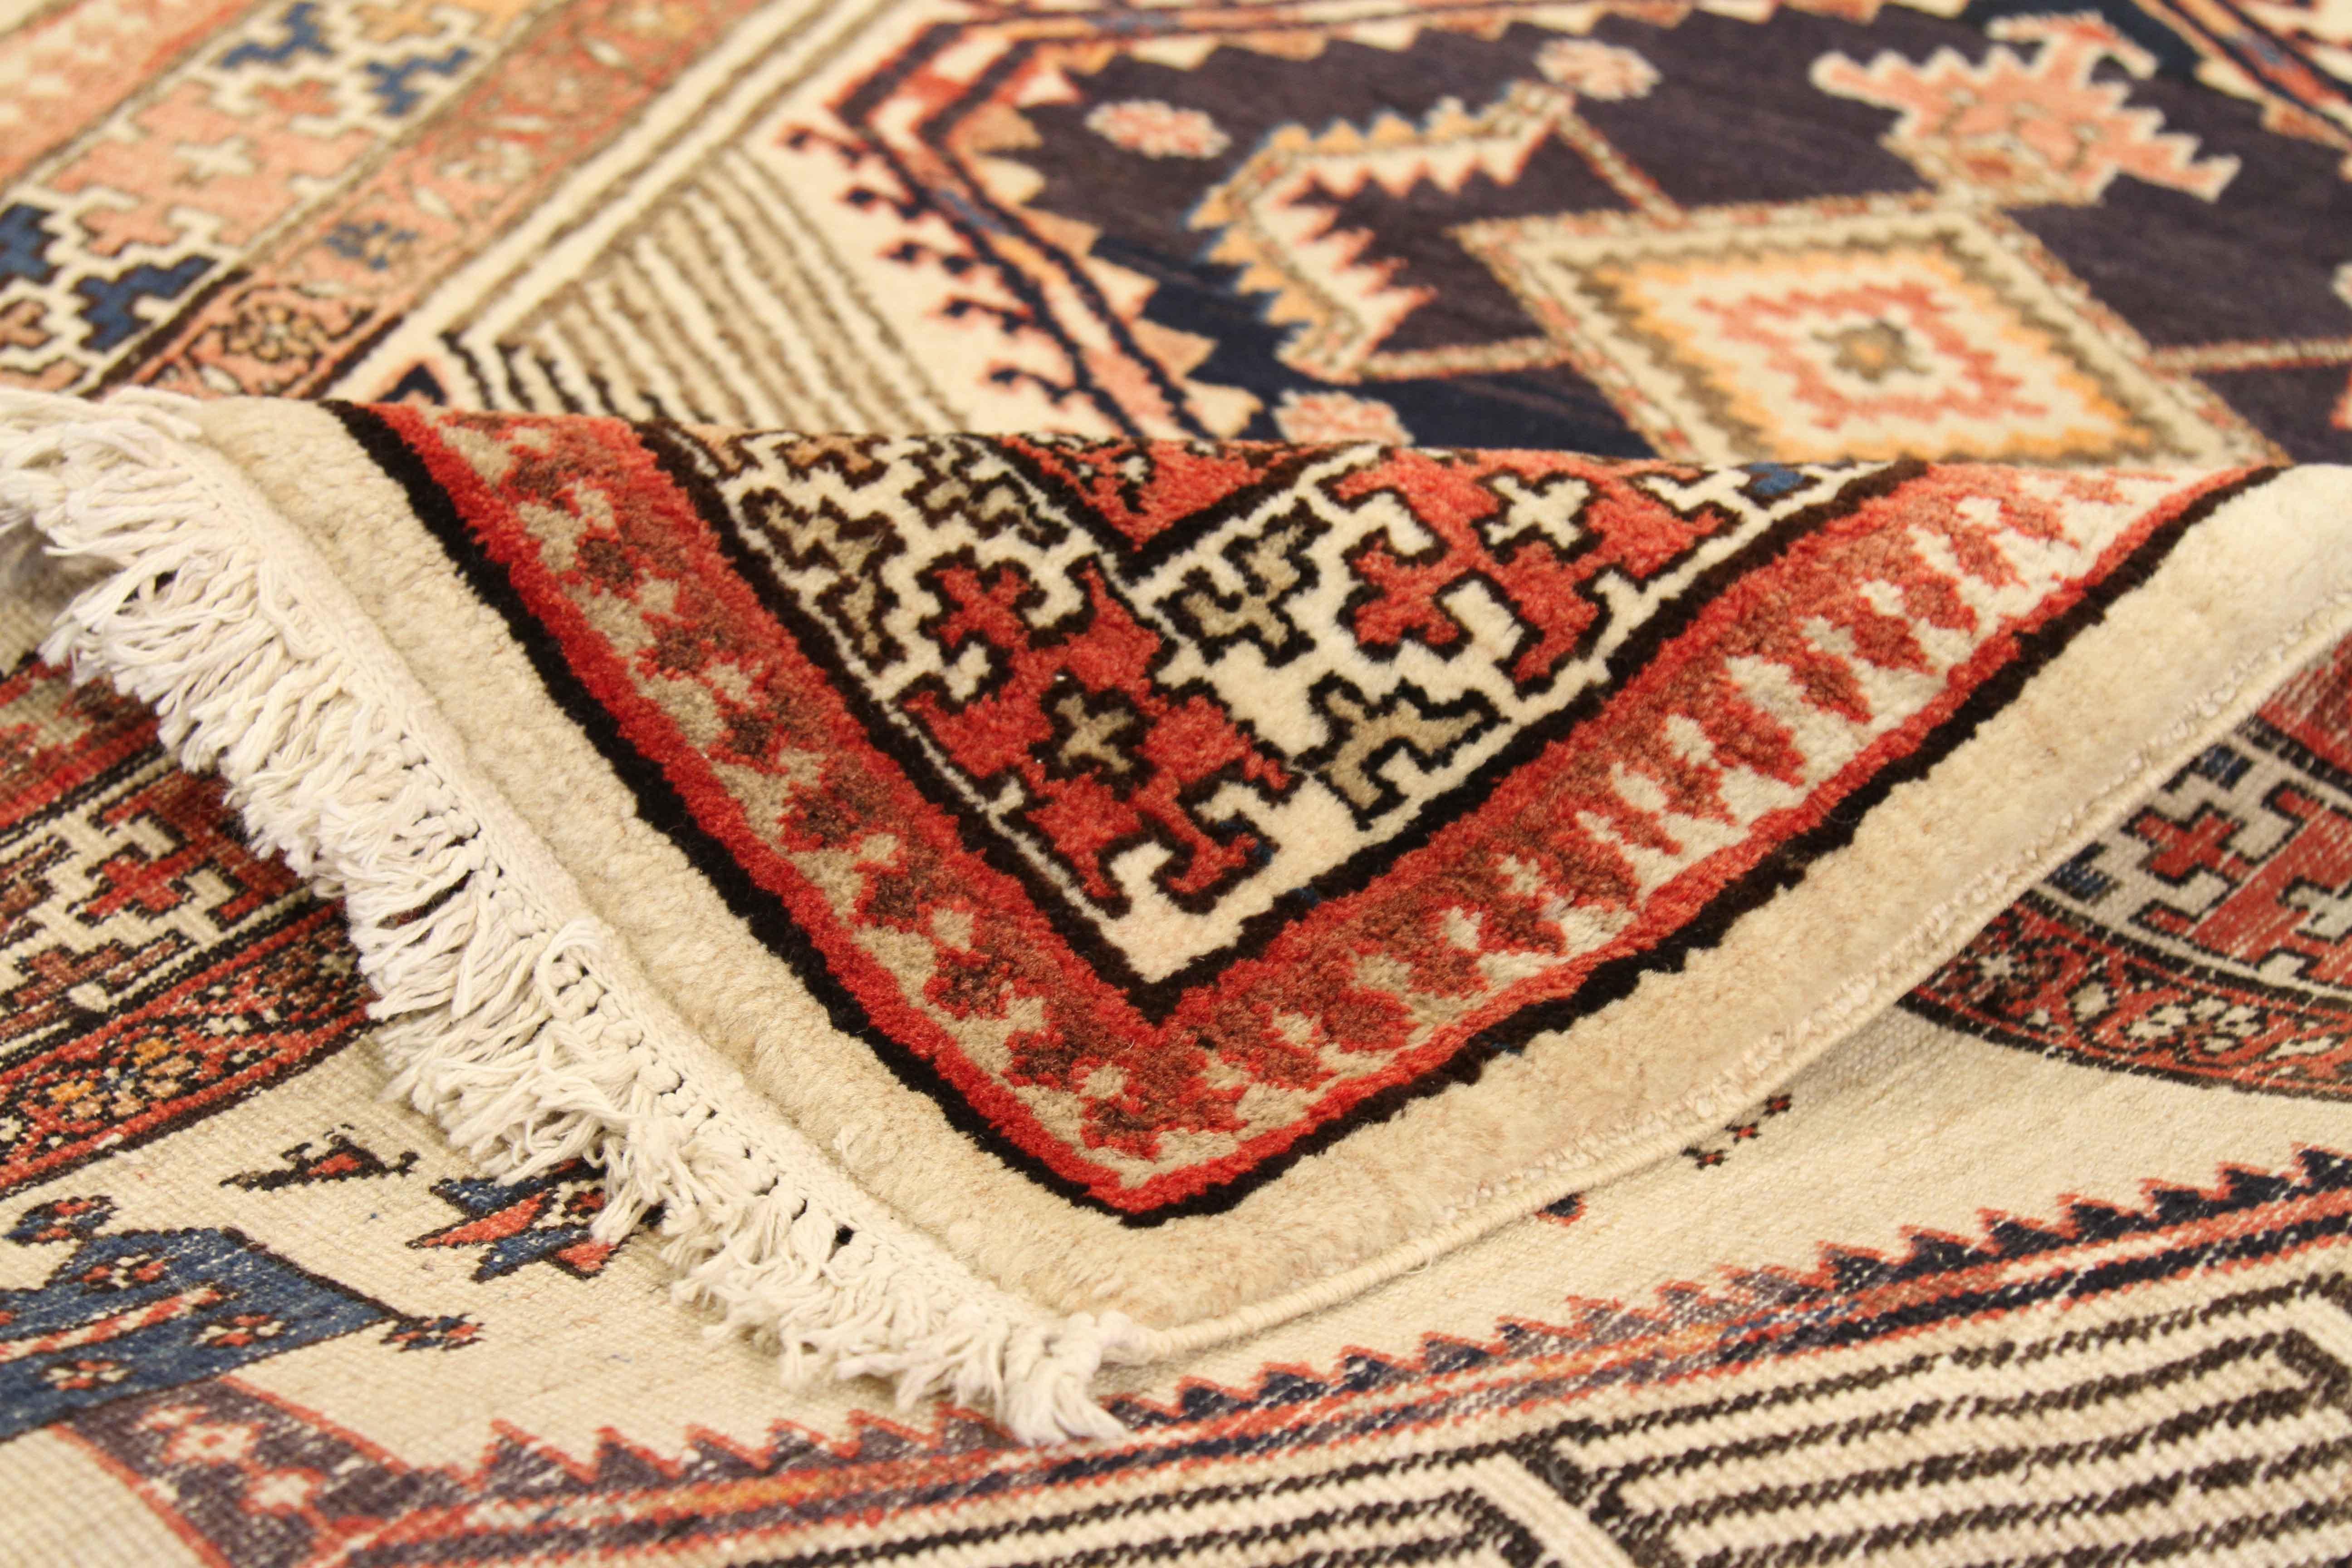 Antique Persian rug made of wool and bright natural dyes handwoven in the 1950s. It showcases a highly intricate tribal pattern using techniques favored by rug makers in Sarab. For color, the field’s foundation is ivory layered with black, navy, and